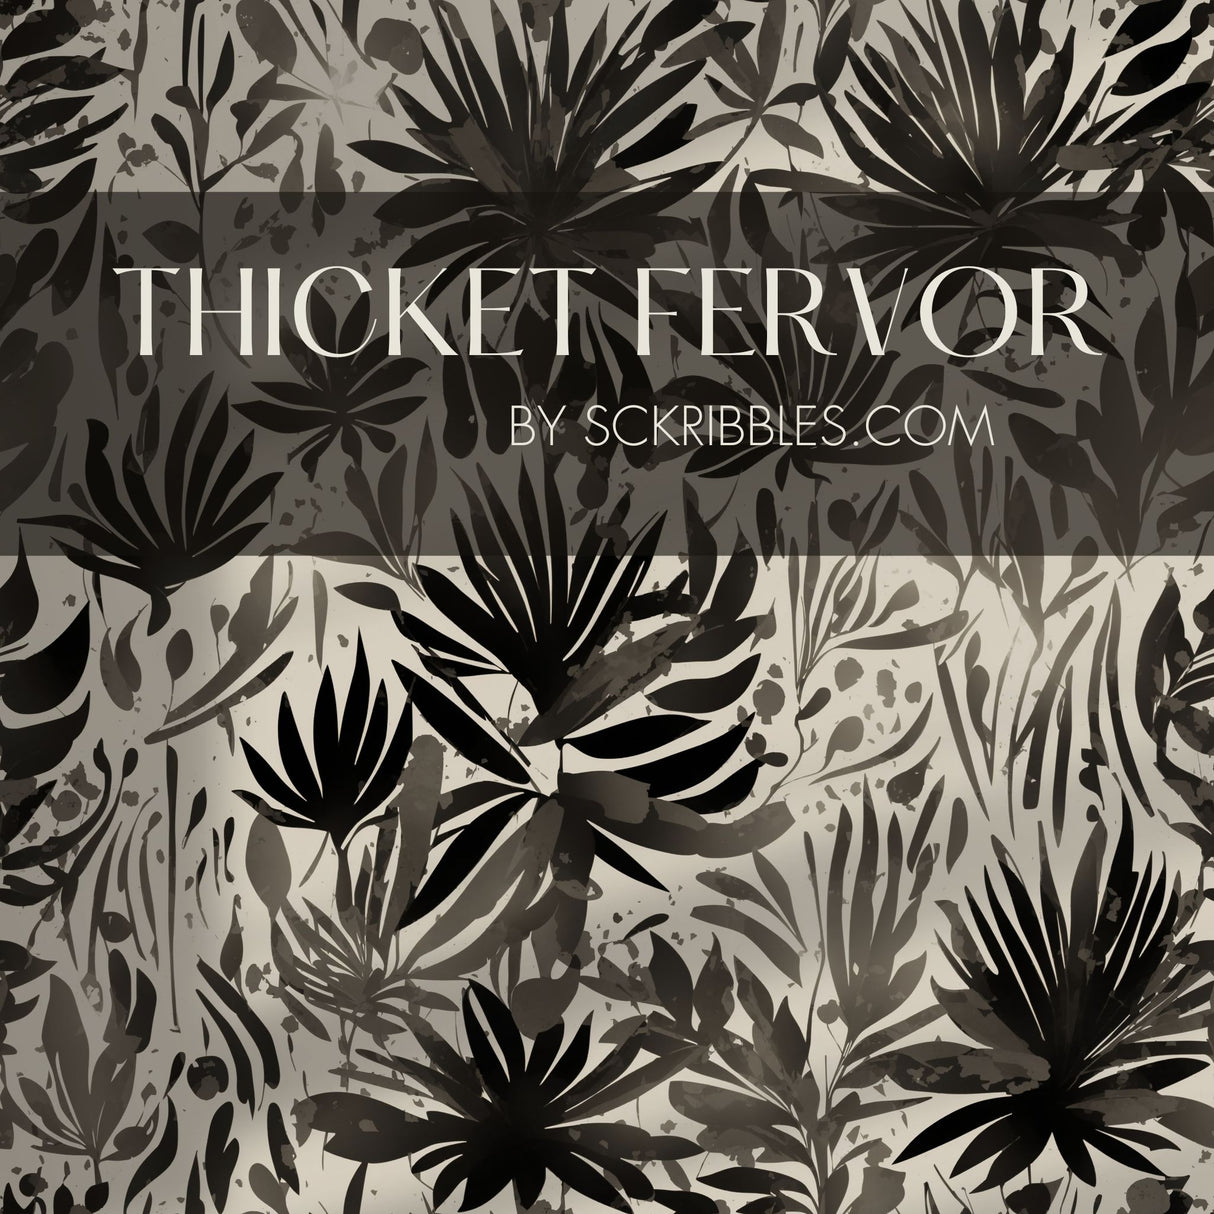 Black and Gray Graphic Nature Wallpaper {Thicket Fervor} Wallpaper Sckribbles   